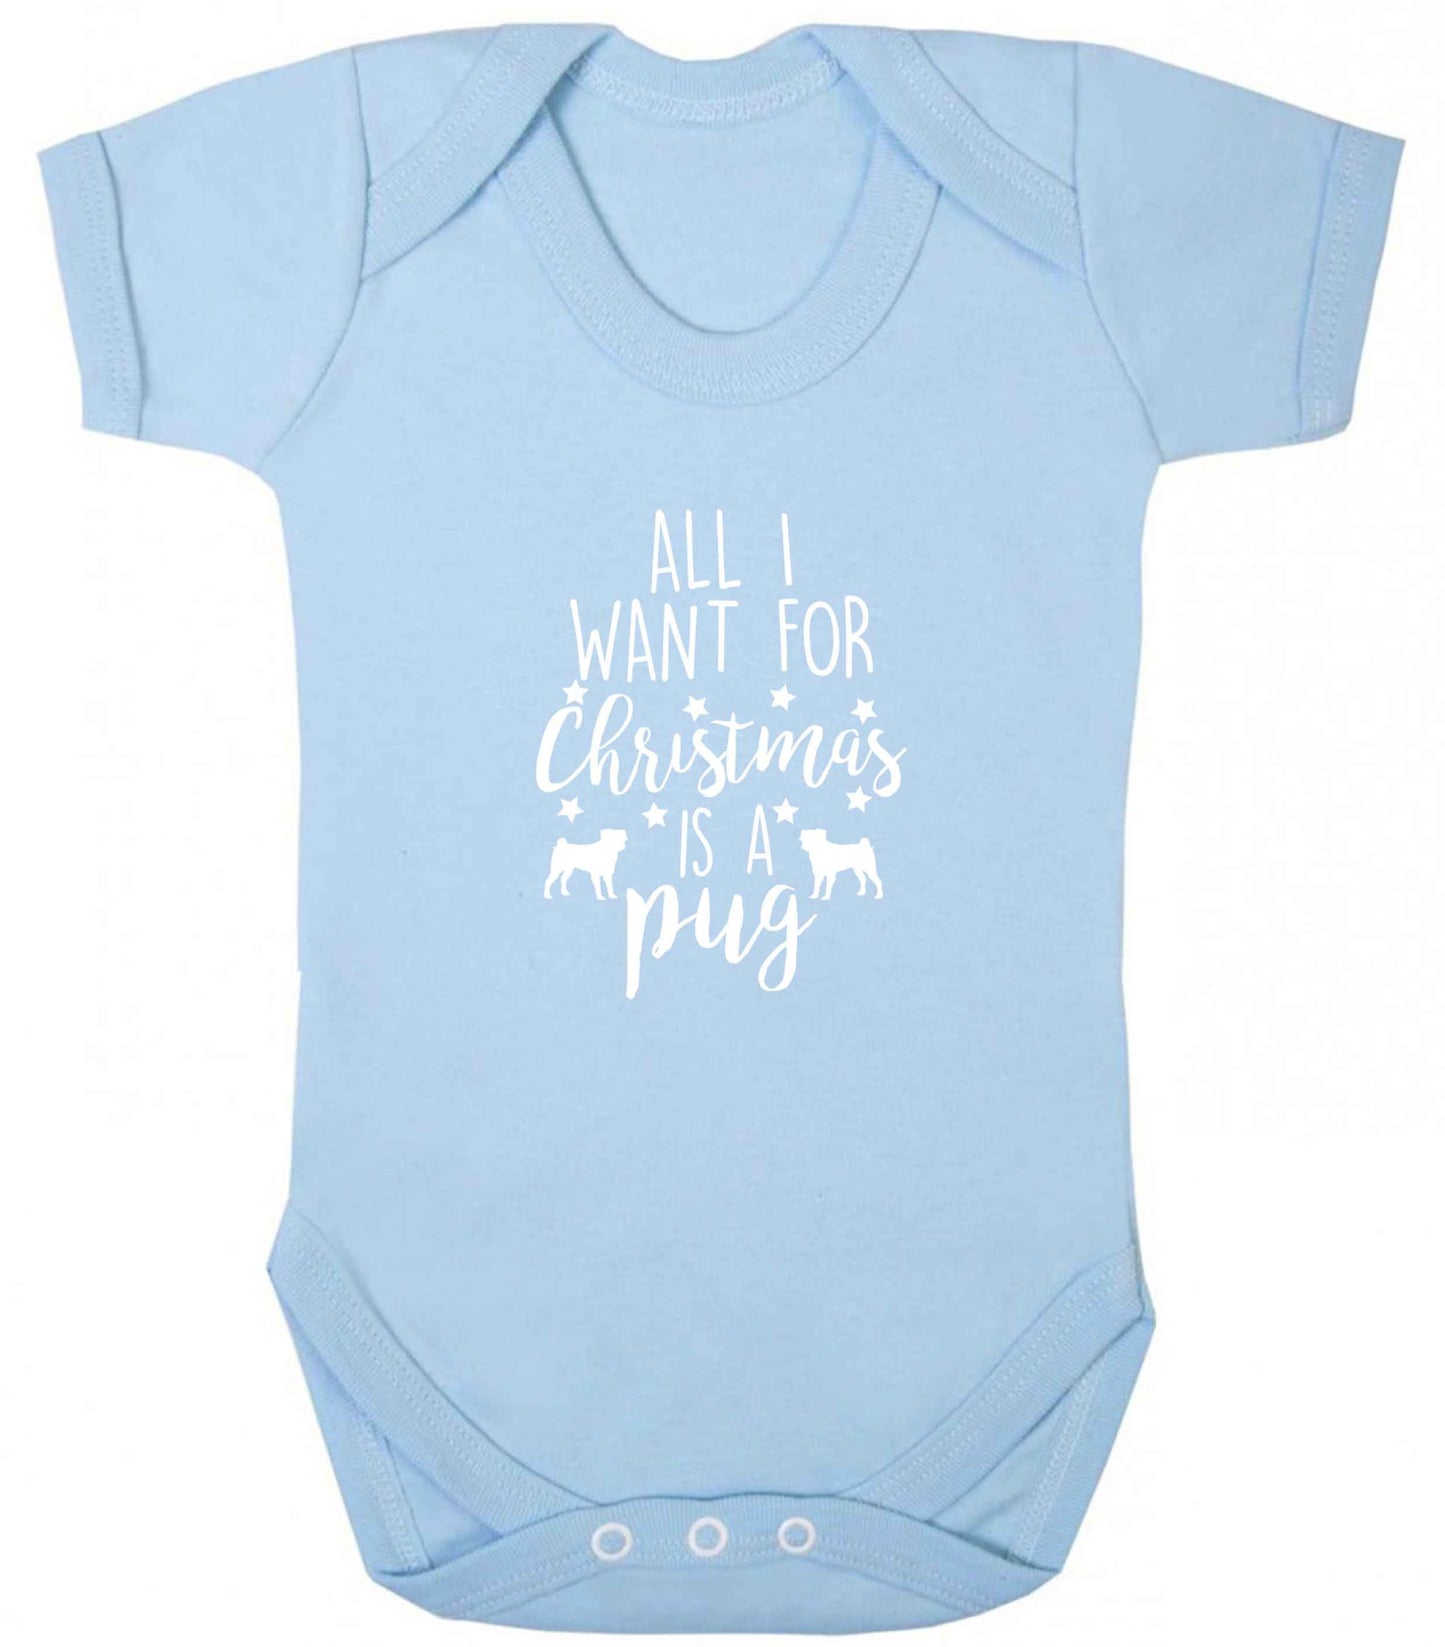 All I want for Christmas is a pug baby vest pale blue 18-24 months